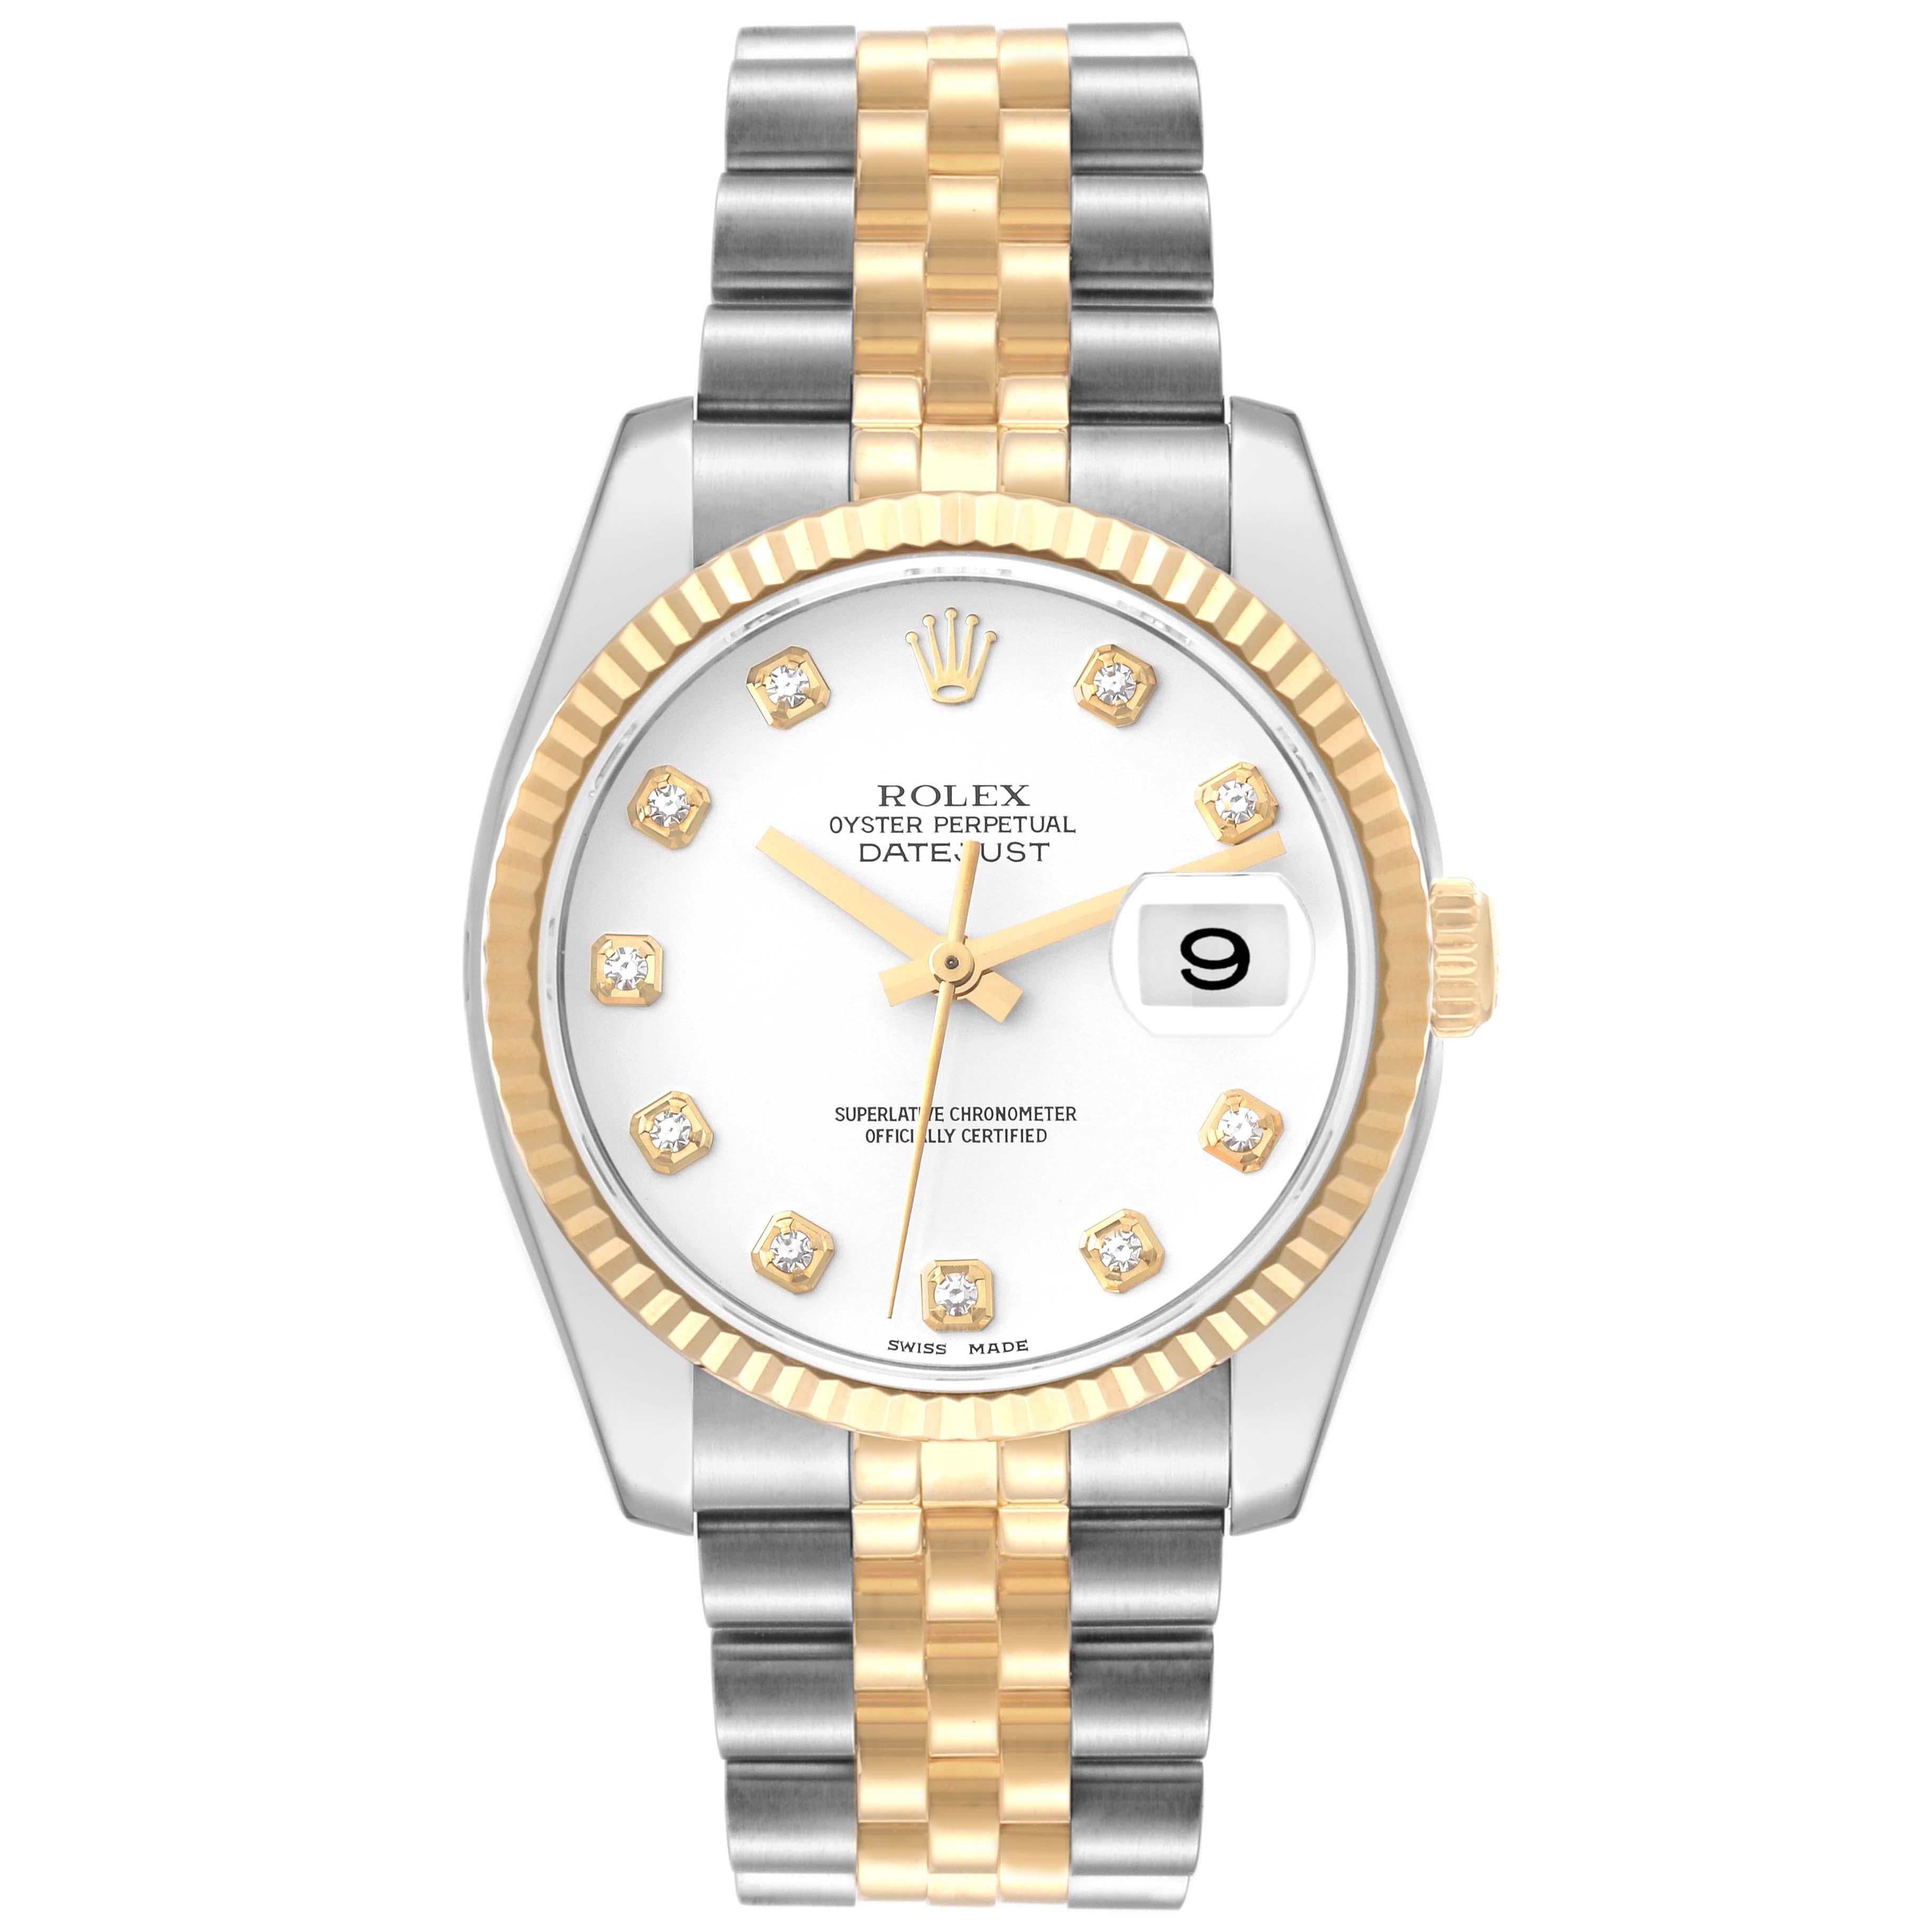 Rolex Datejust Steel Yellow Gold White Diamond Dial Mens Watch 116233. Officially certified chronometer self-winding movement. Stainless steel case 36 mm in diameter.  Rolex logo on a crown. 18k yellow gold fluted bezel. Scratch resistant sapphire